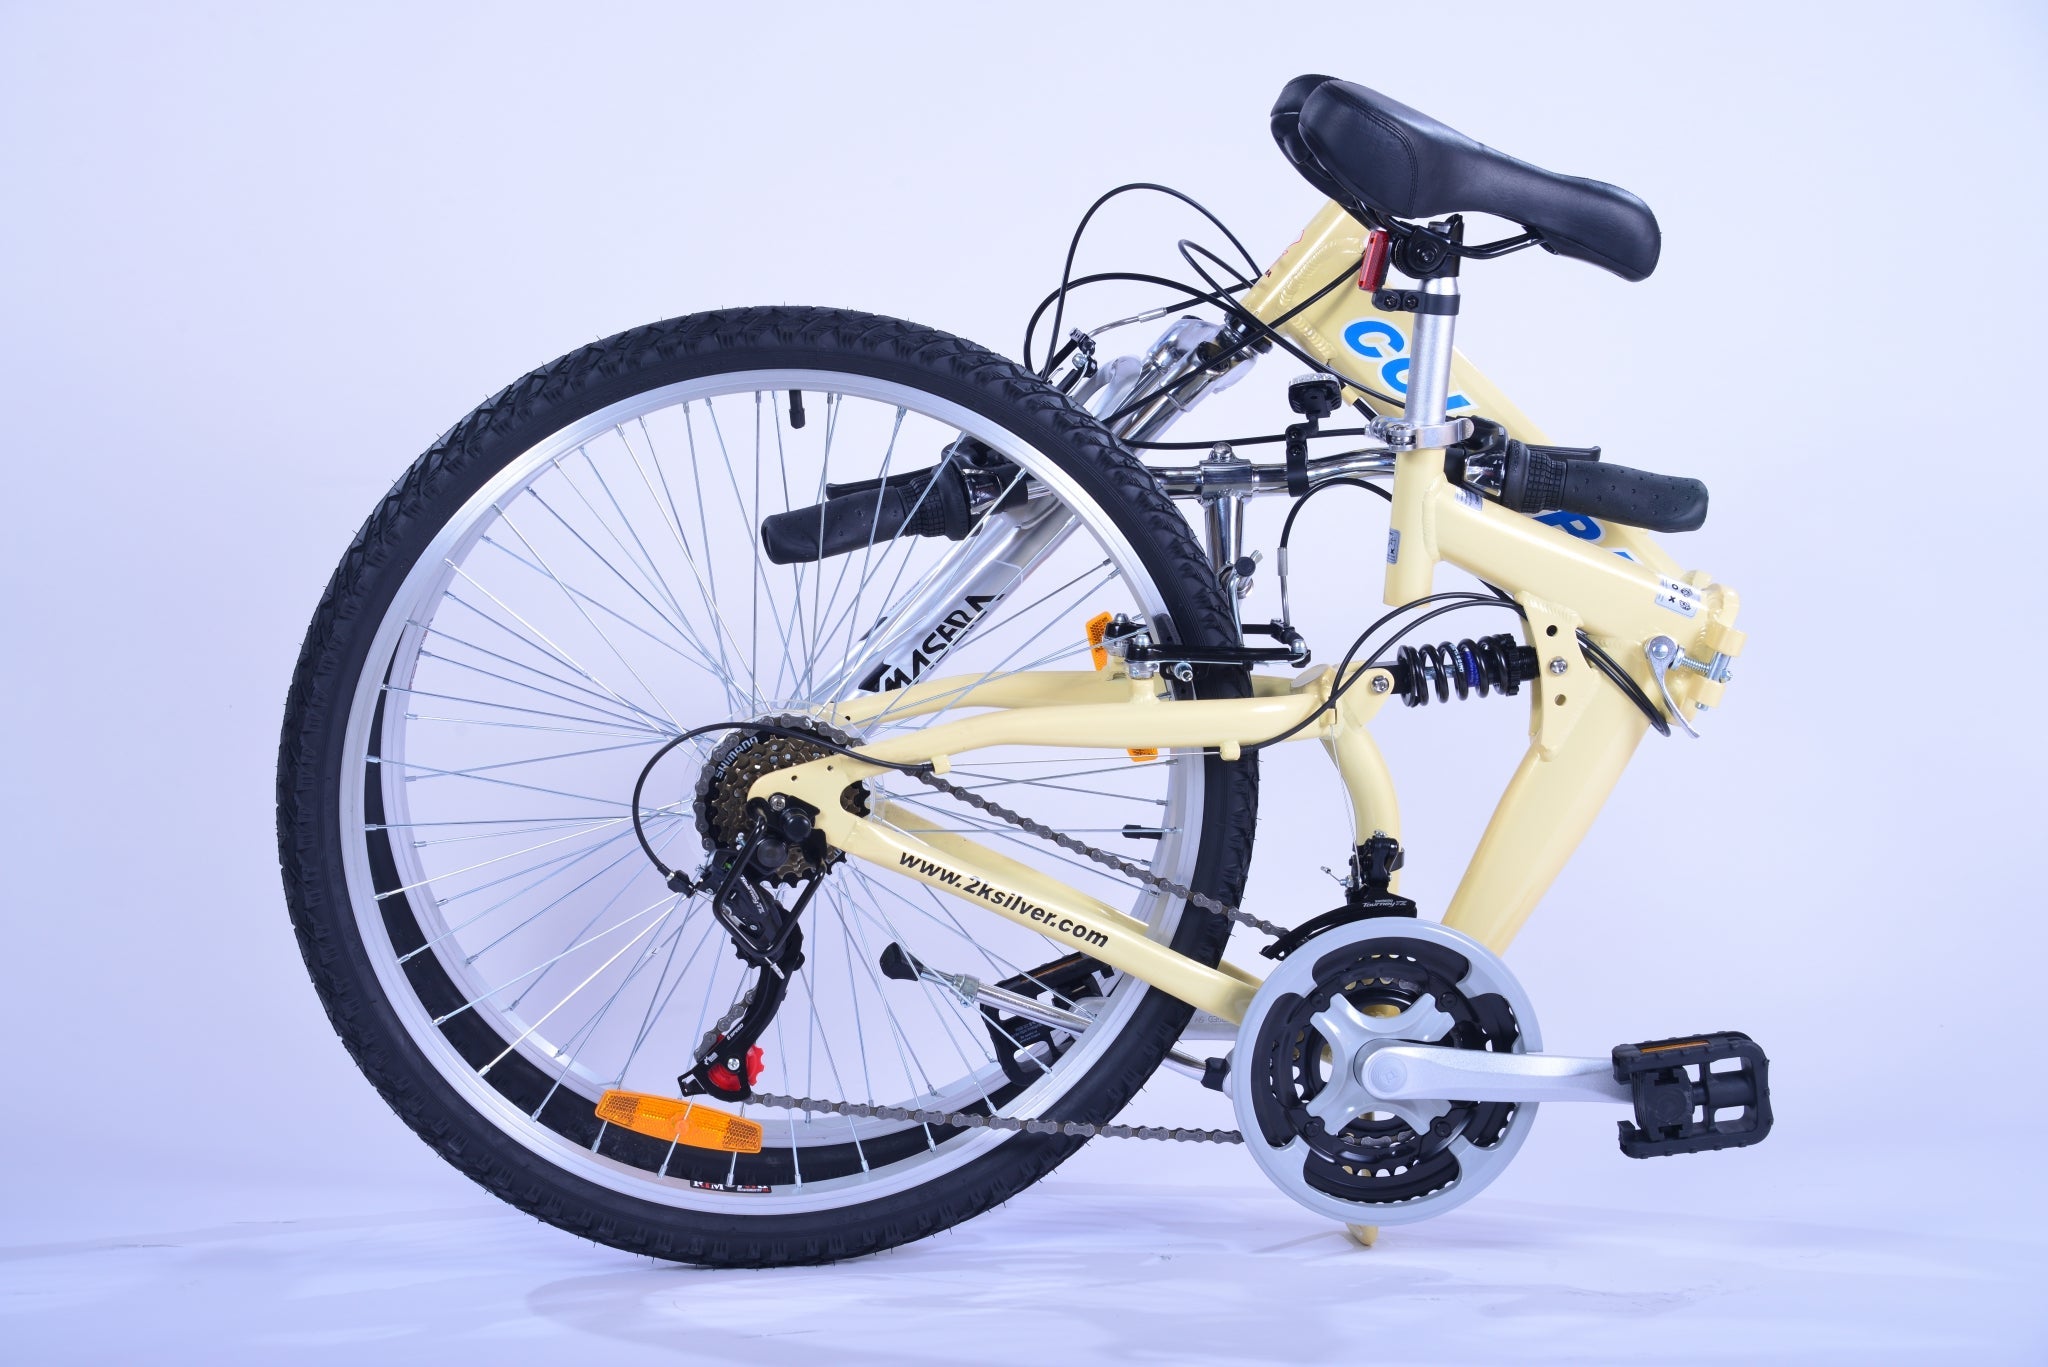 Folded position of a cream colored folding bicycle.